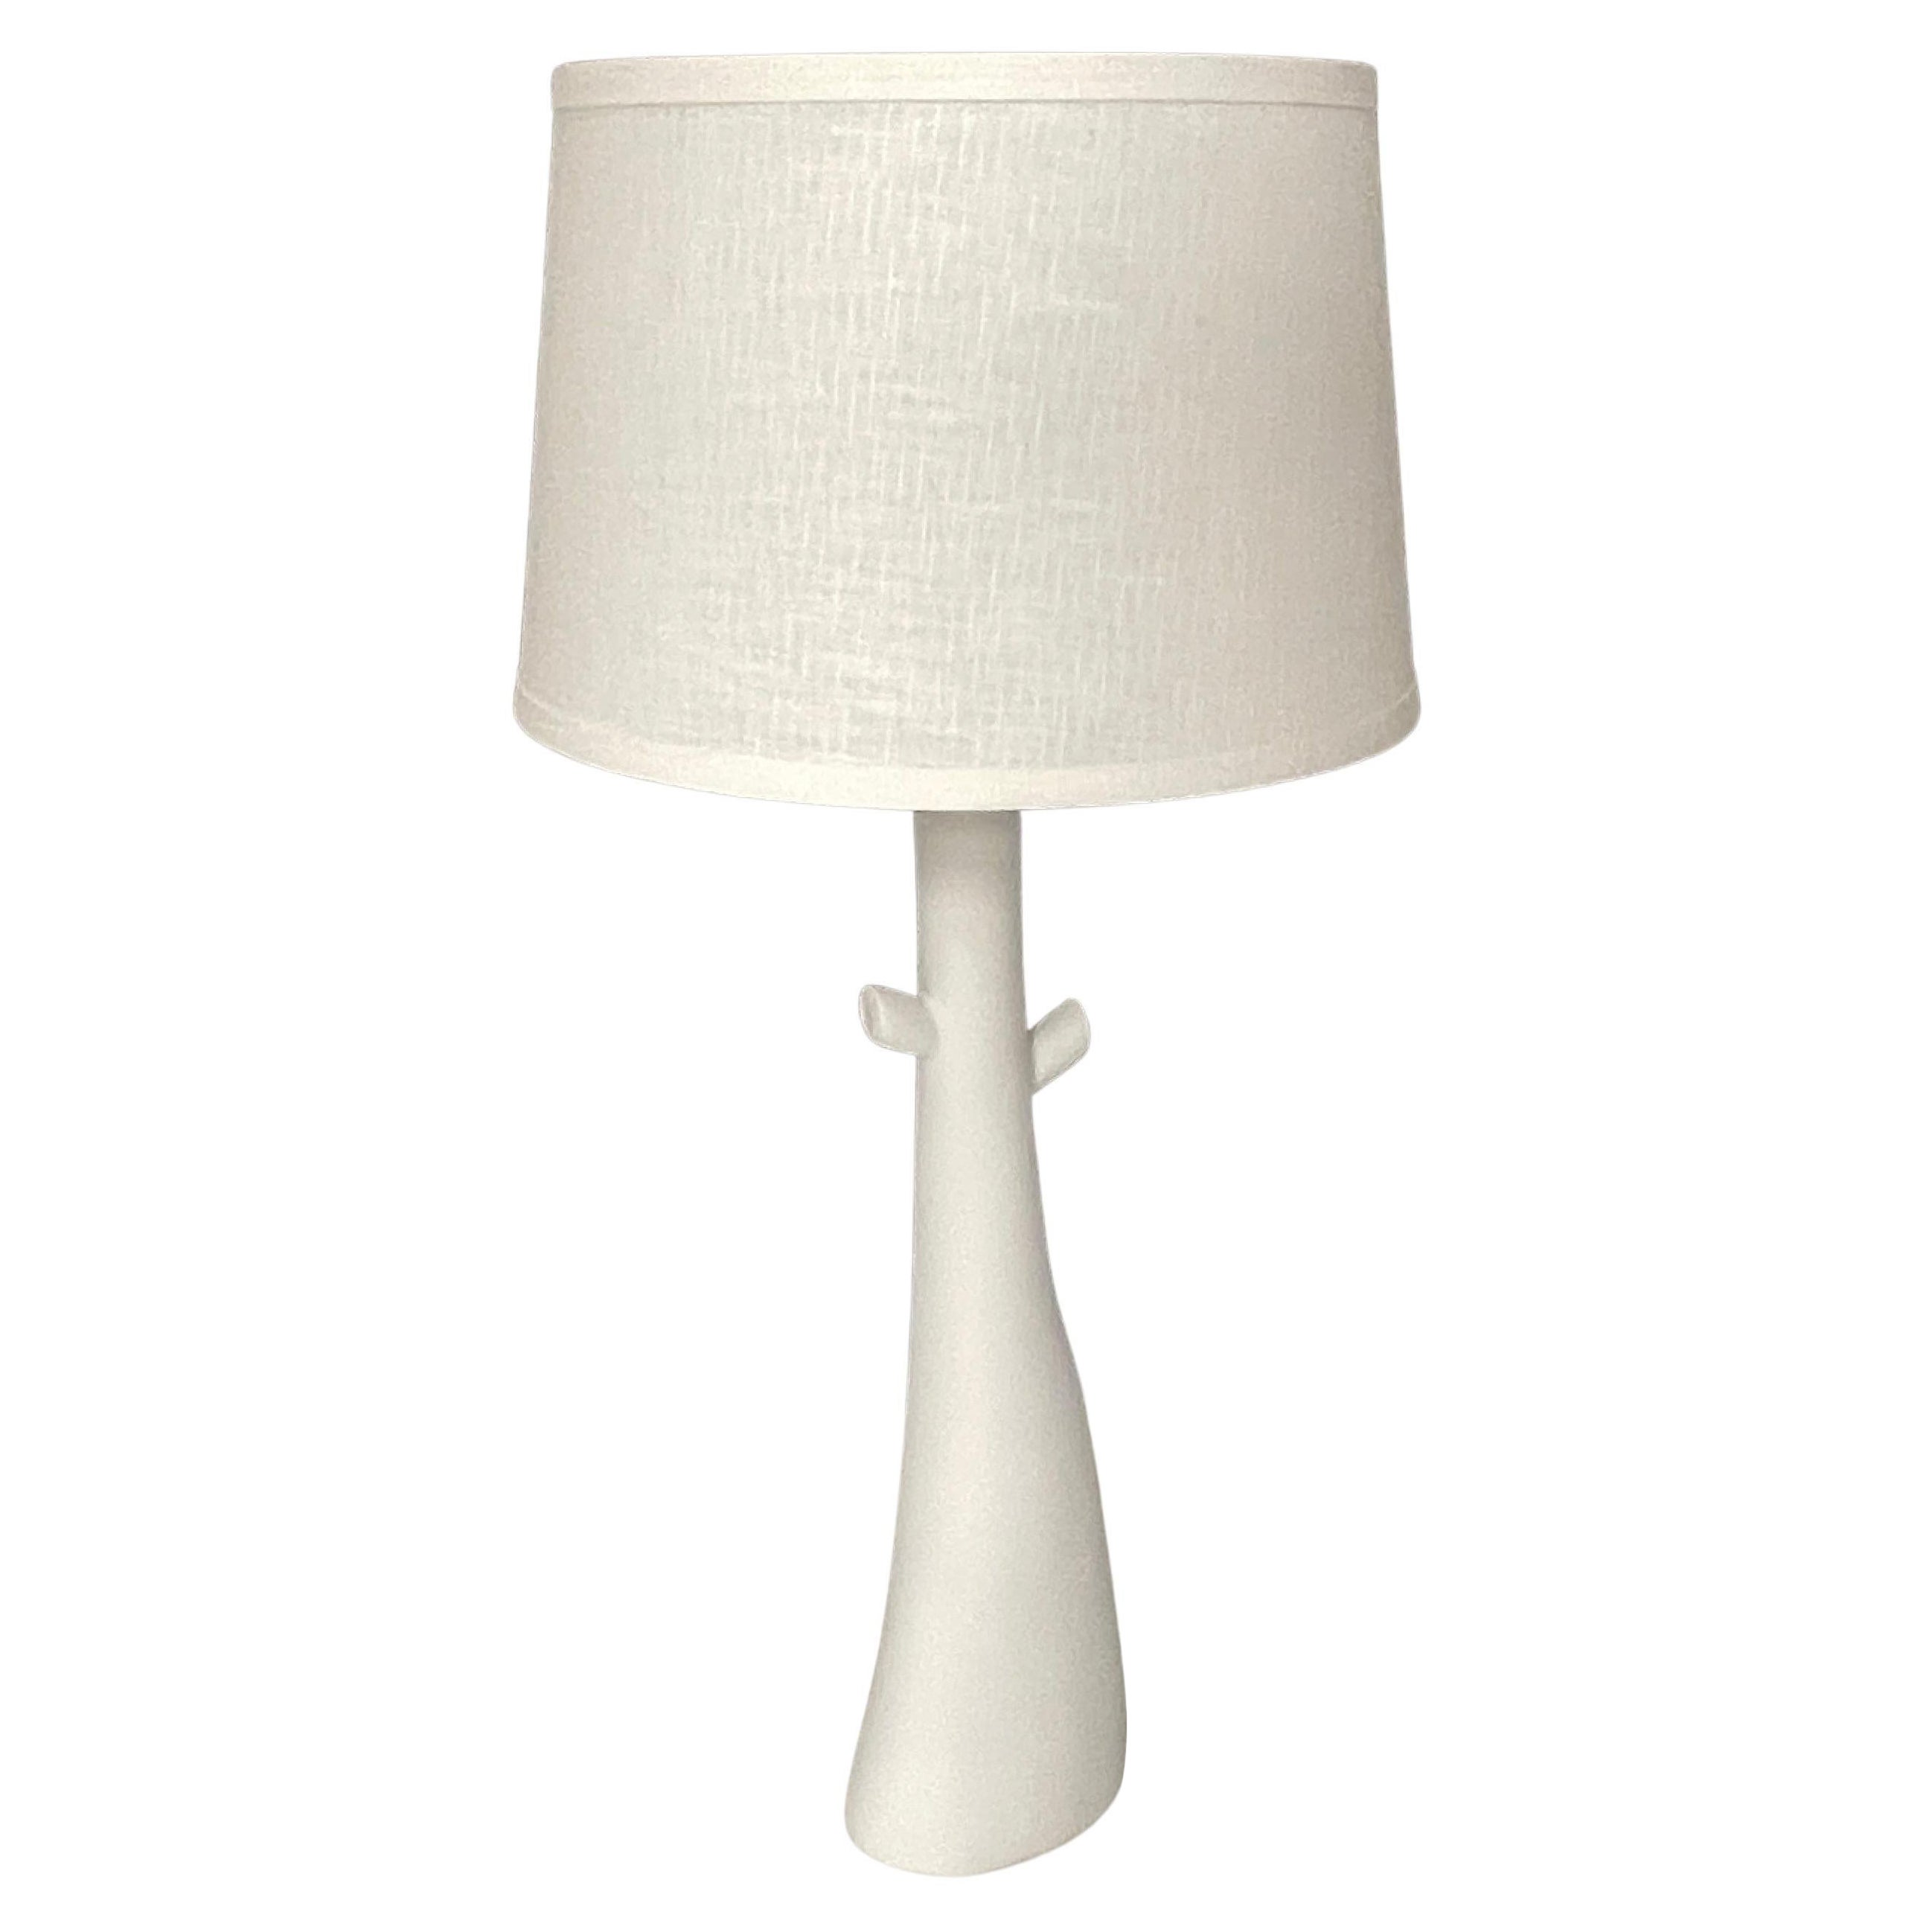 Monceau Table Lamp, by Bourgeois Boheme Atelier